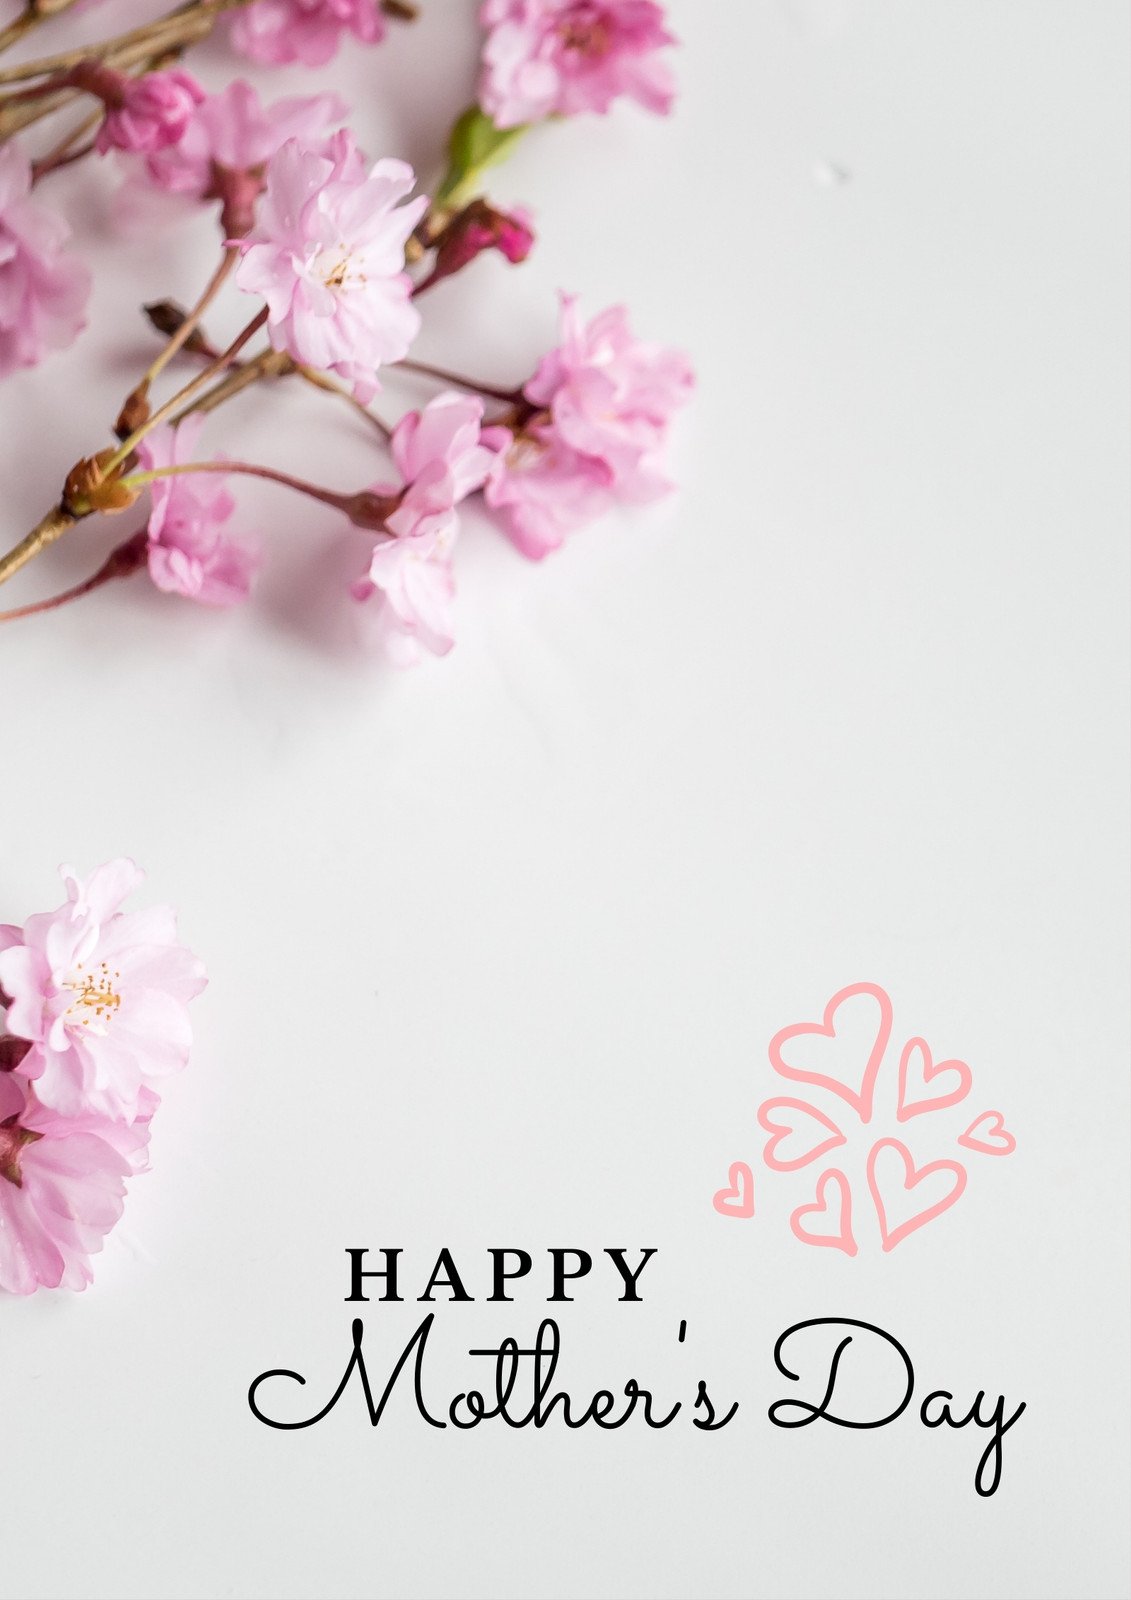 Free custom printable Mother's Day poster templates | Canva